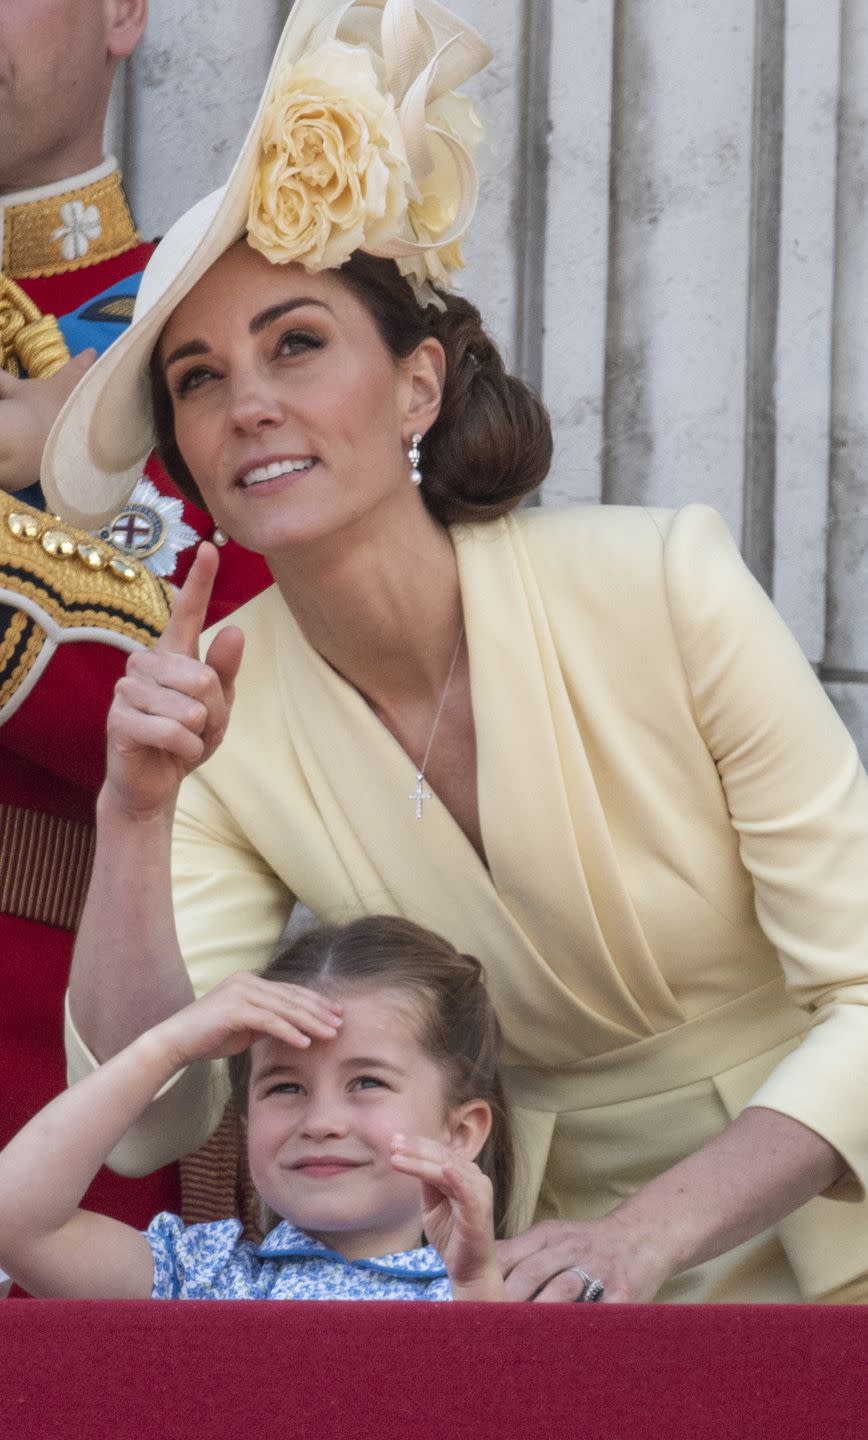 The Cutest Photos of Prince George, Princess Charlotte and Prince Louis at Trooping the Colour